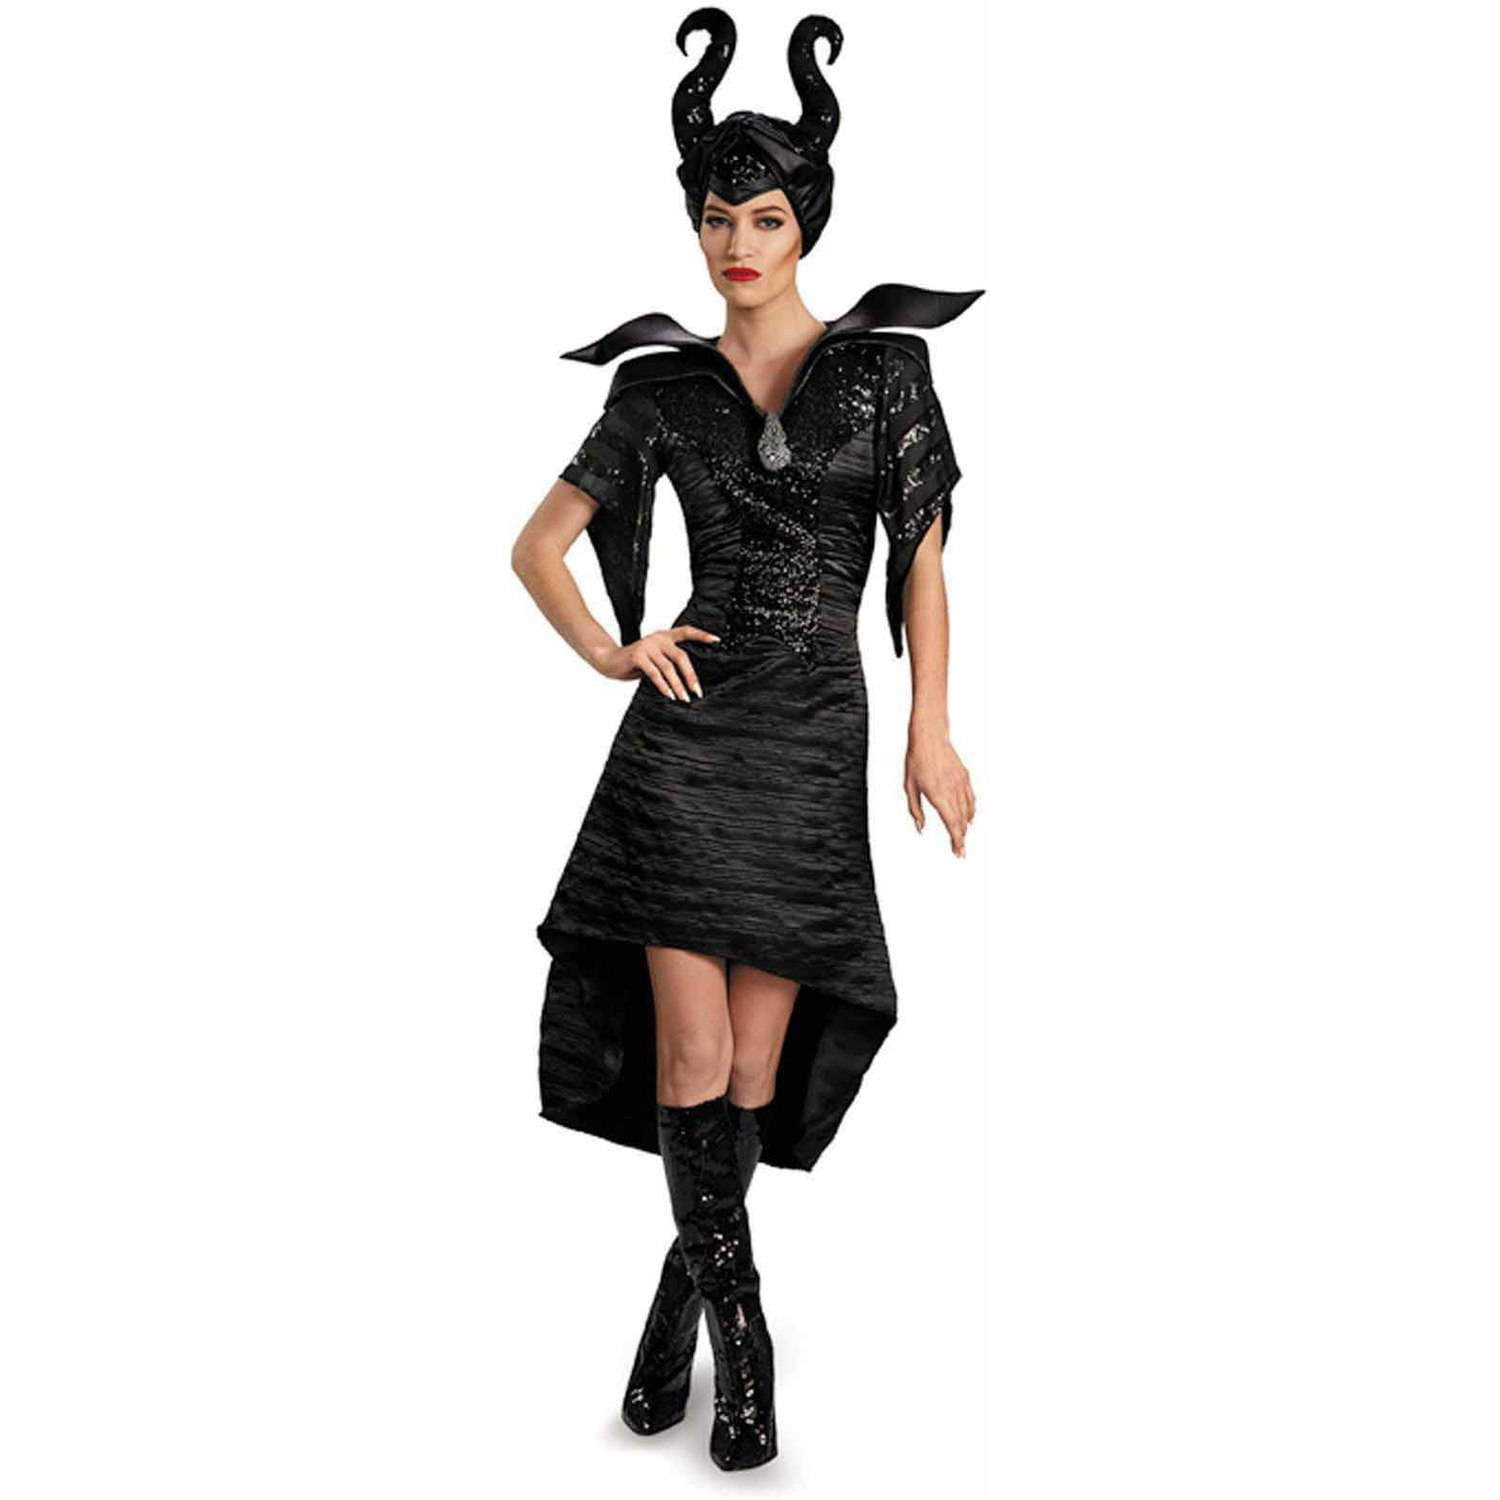 US Movie Maleficent Black Gown Christening Costume Witch Cosplay Fancy Dress 